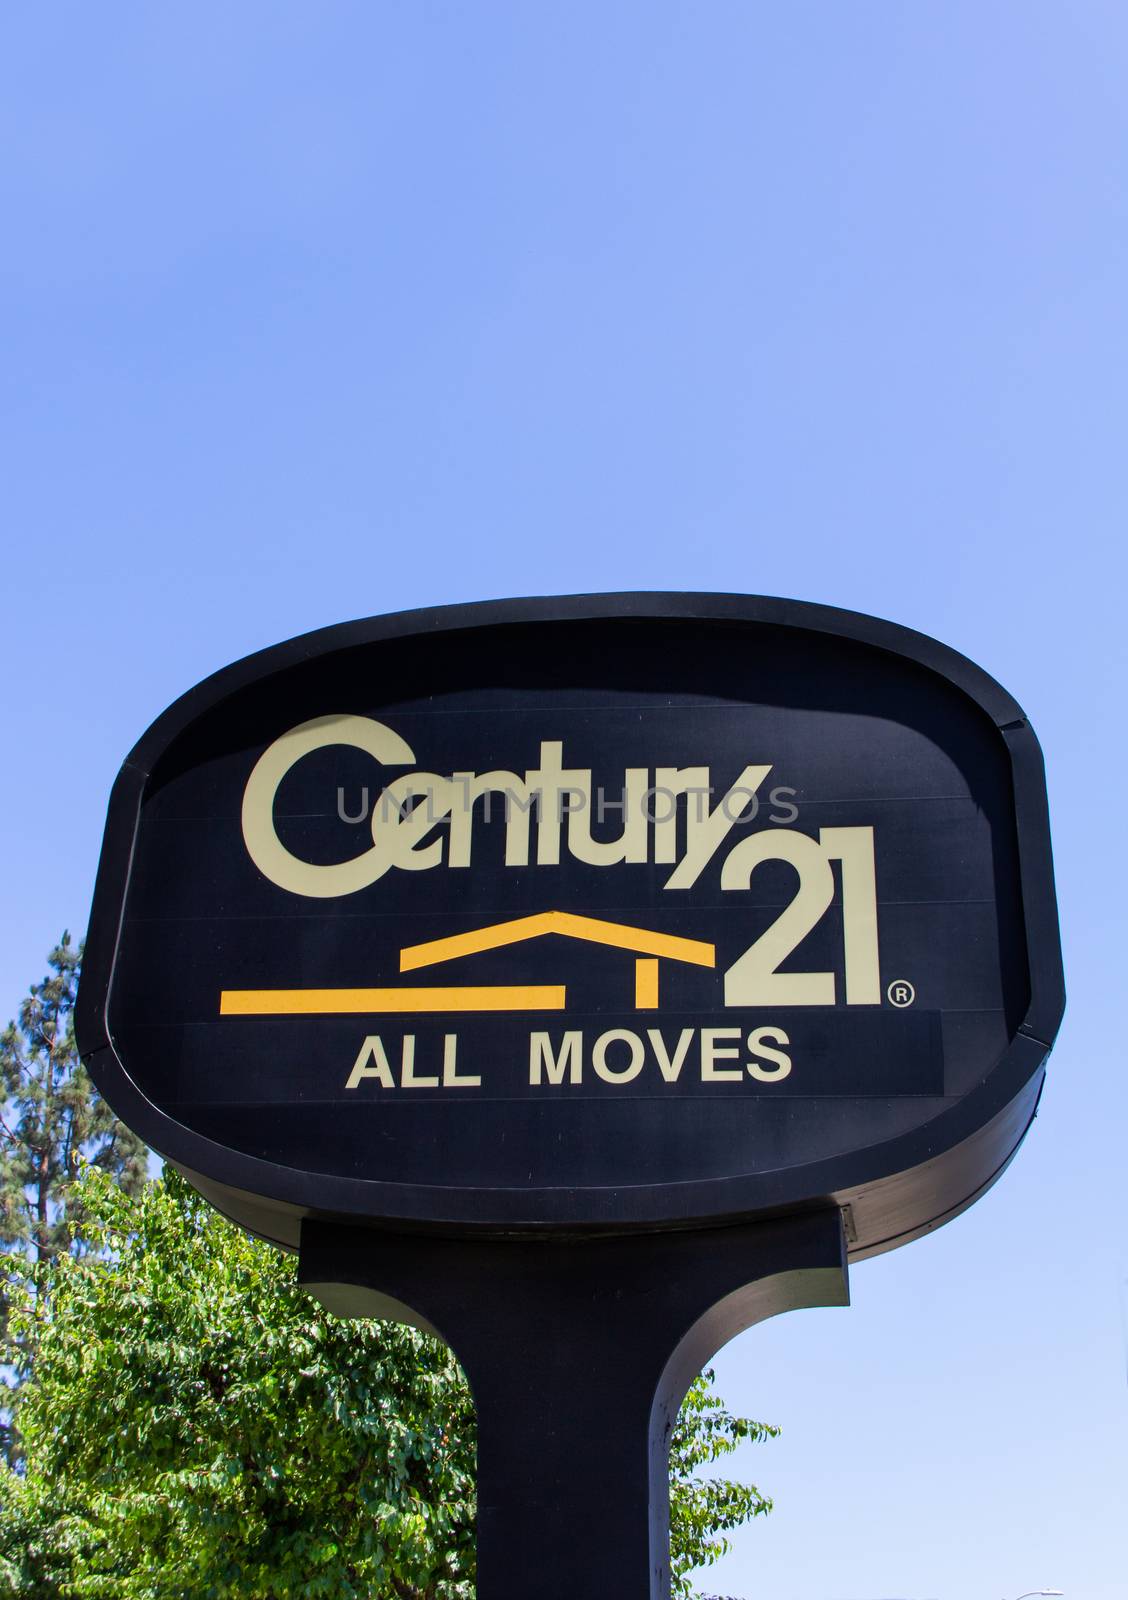 GRANADA HILLS, CA/USA - JUNE 15, 2015: Century 21 exterior sign and logo. Century 21 Real Estate is an American real estate agent franchise company.